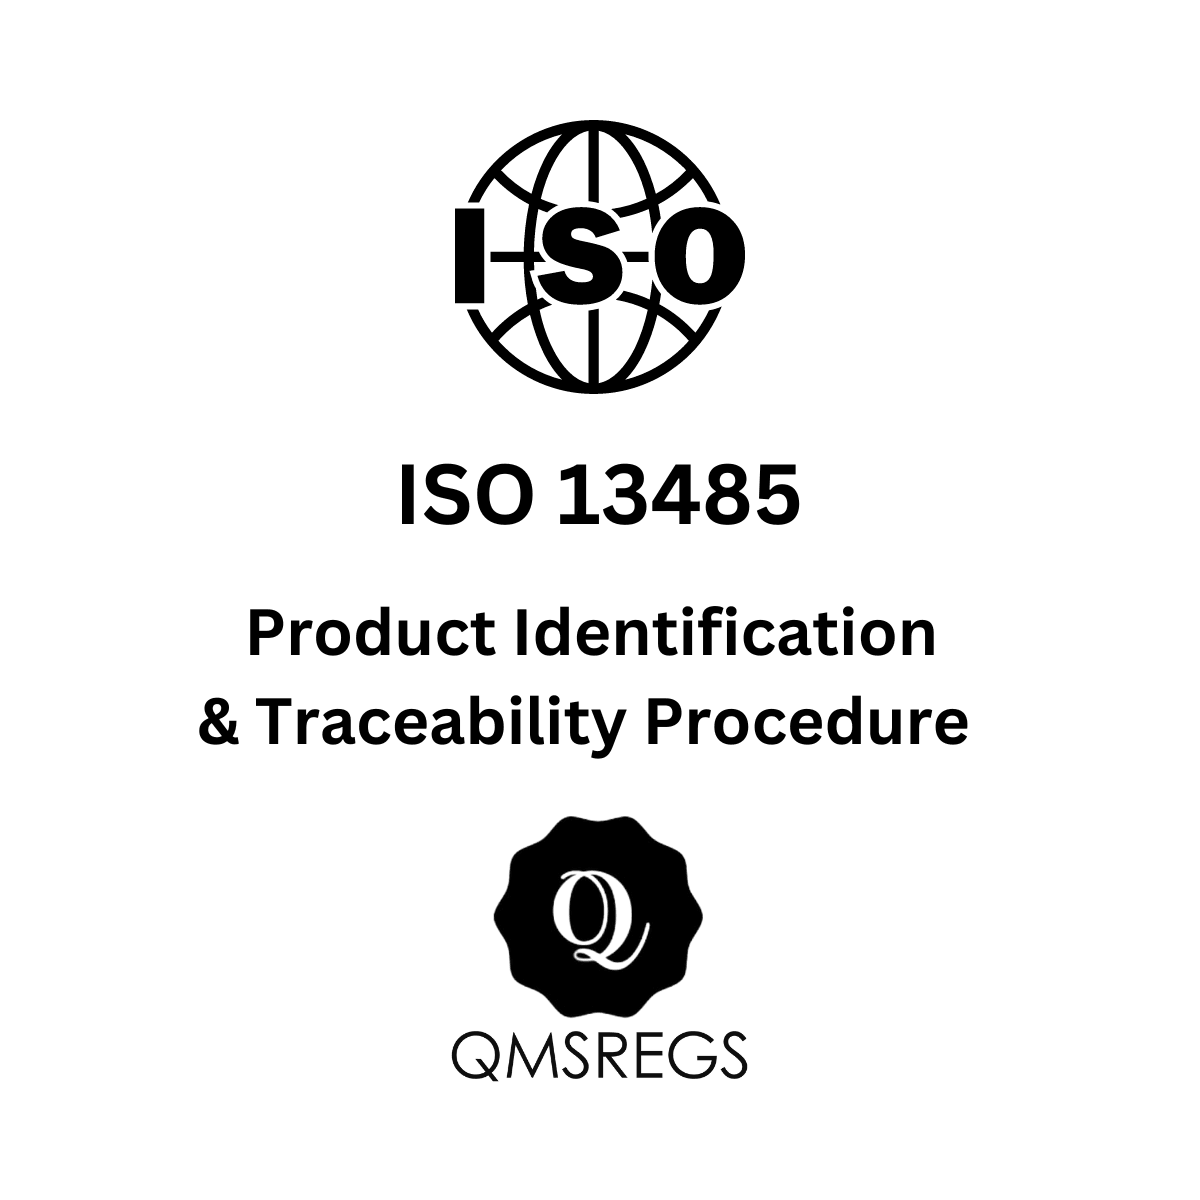 ISO 13485 Product Identification and Traceability Procedure Template